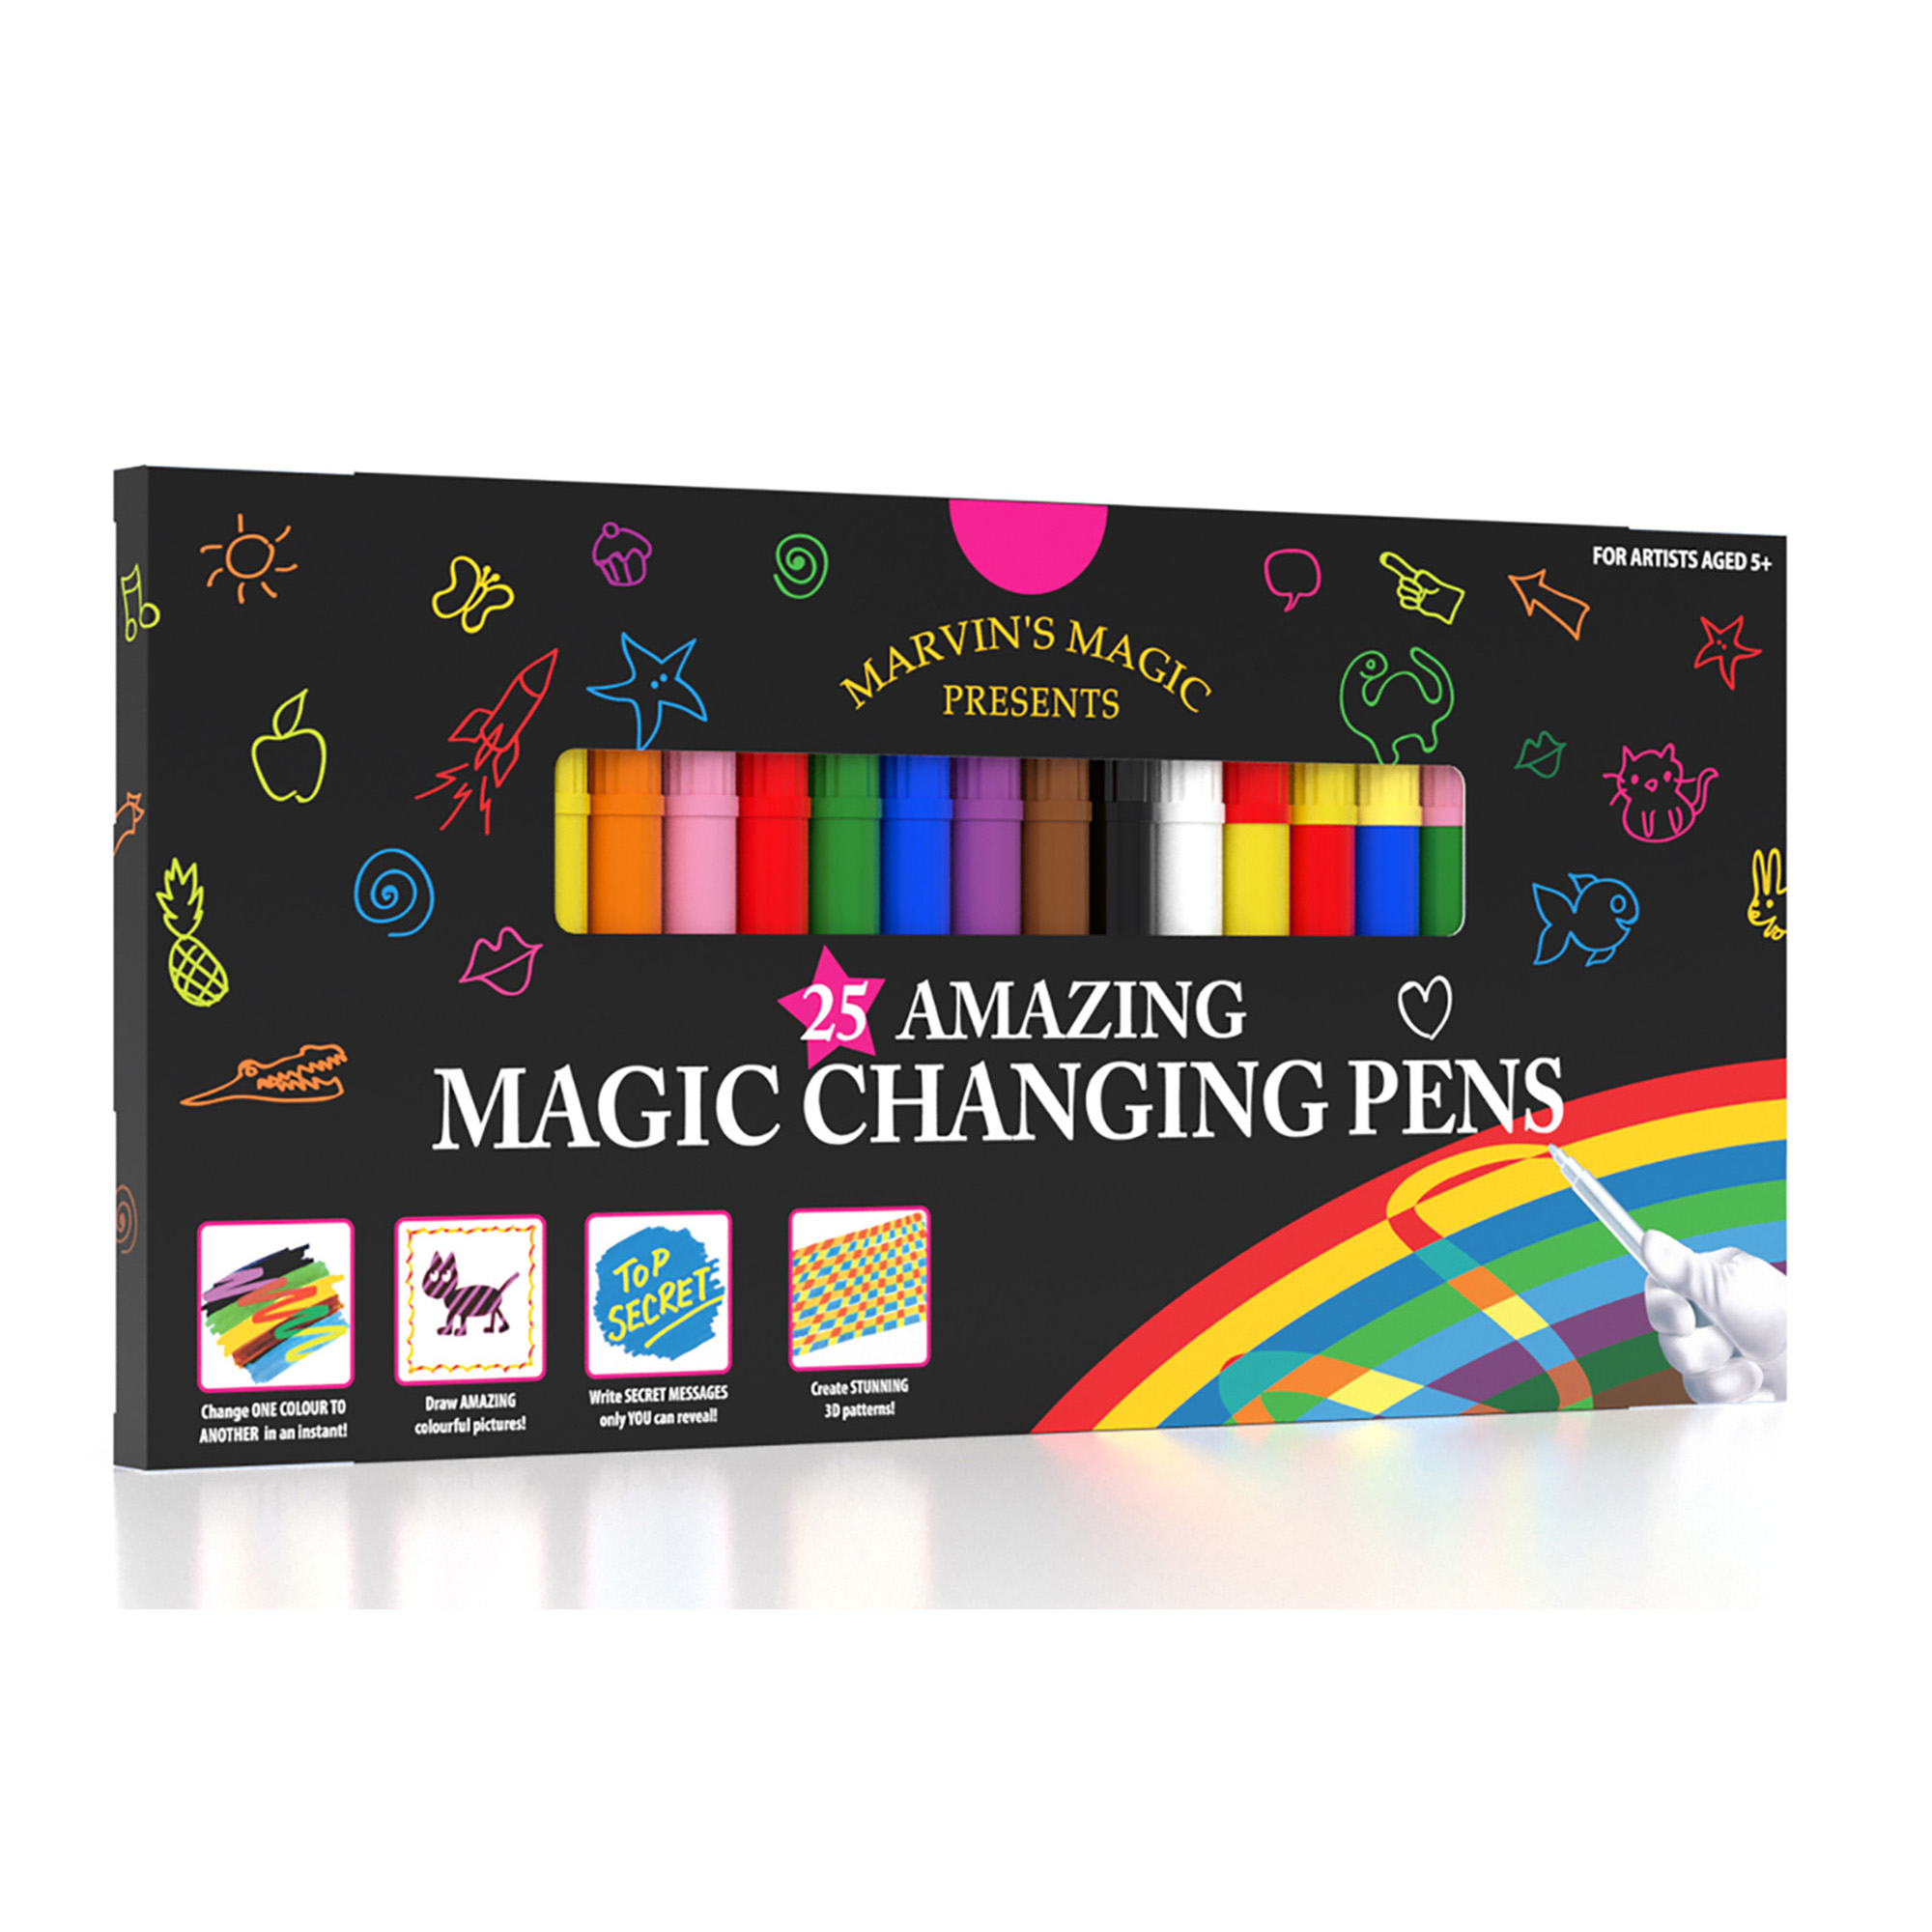 Amazing magic changing pens (25 pack) - Marvin's Magic